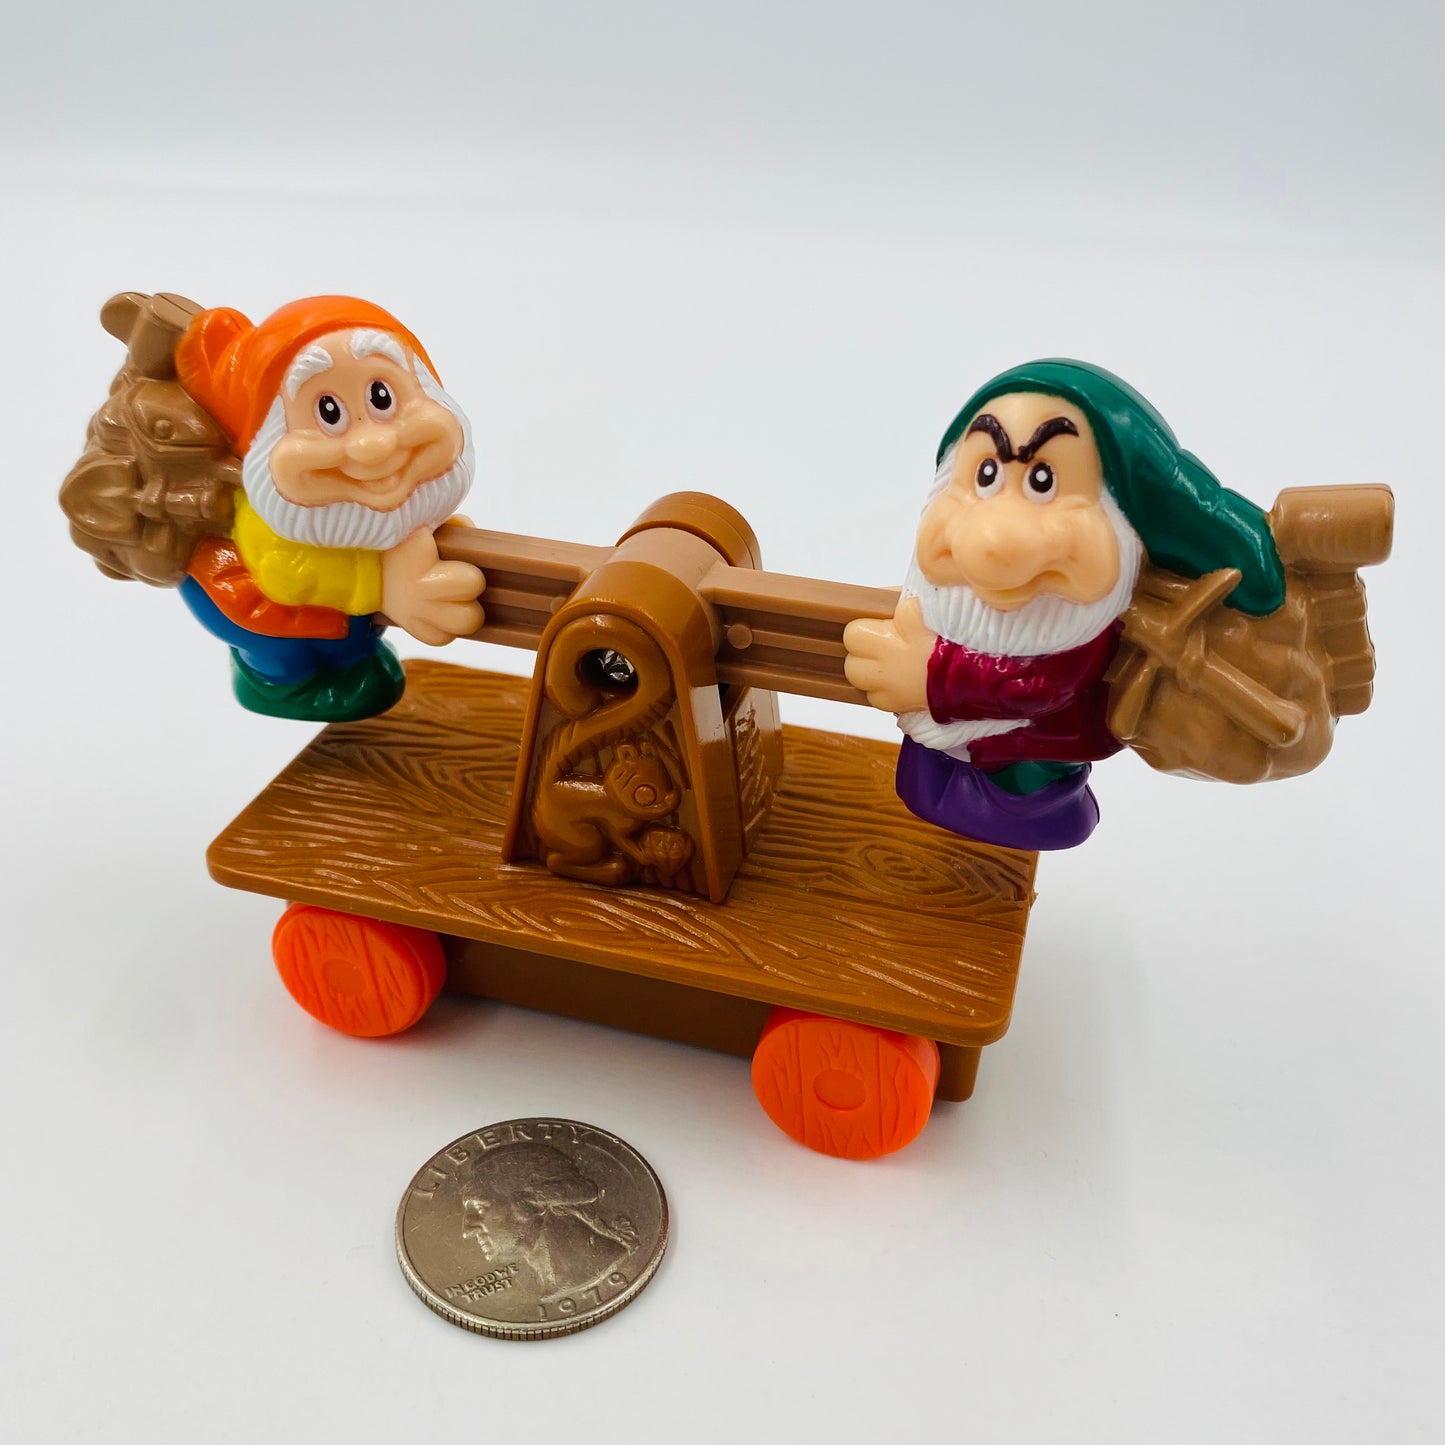 Snow White and the Seven Dwarfs set McDonald's Happy Meal toy (1992) loose